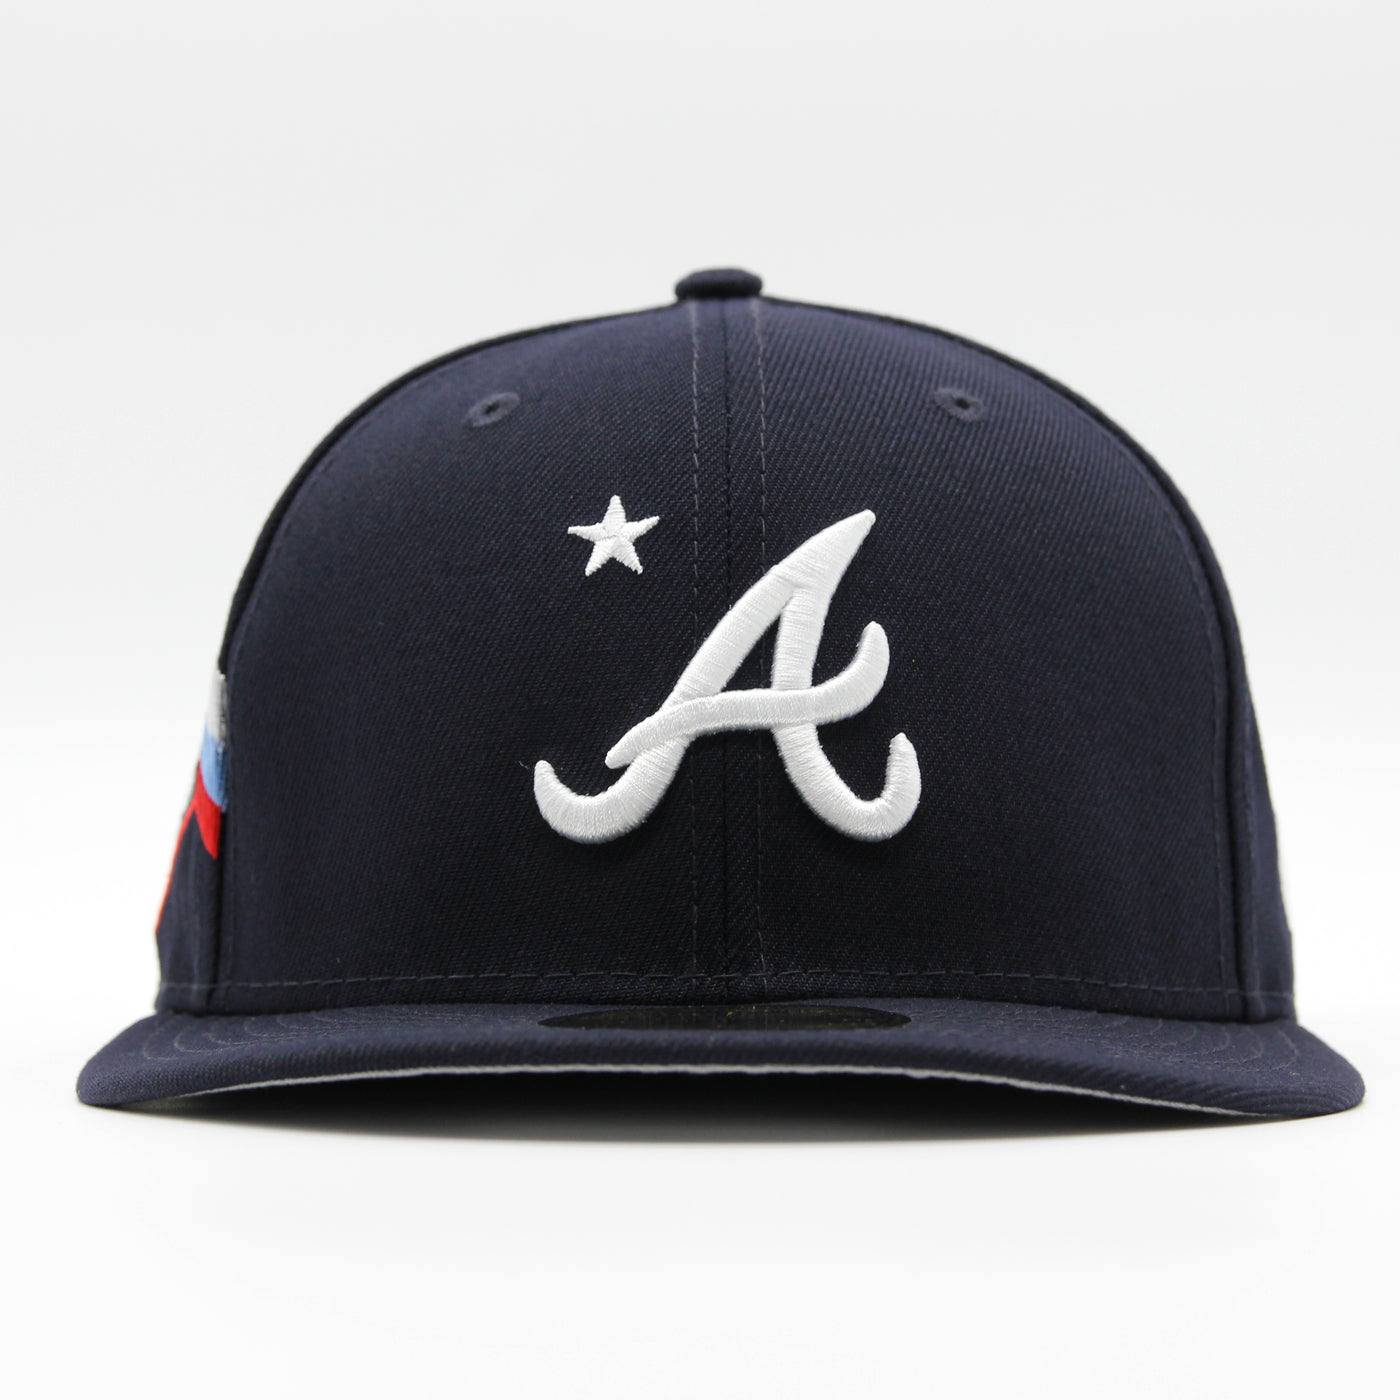 New Era MLB All Star Game Workout 59Fifty A Braves navy